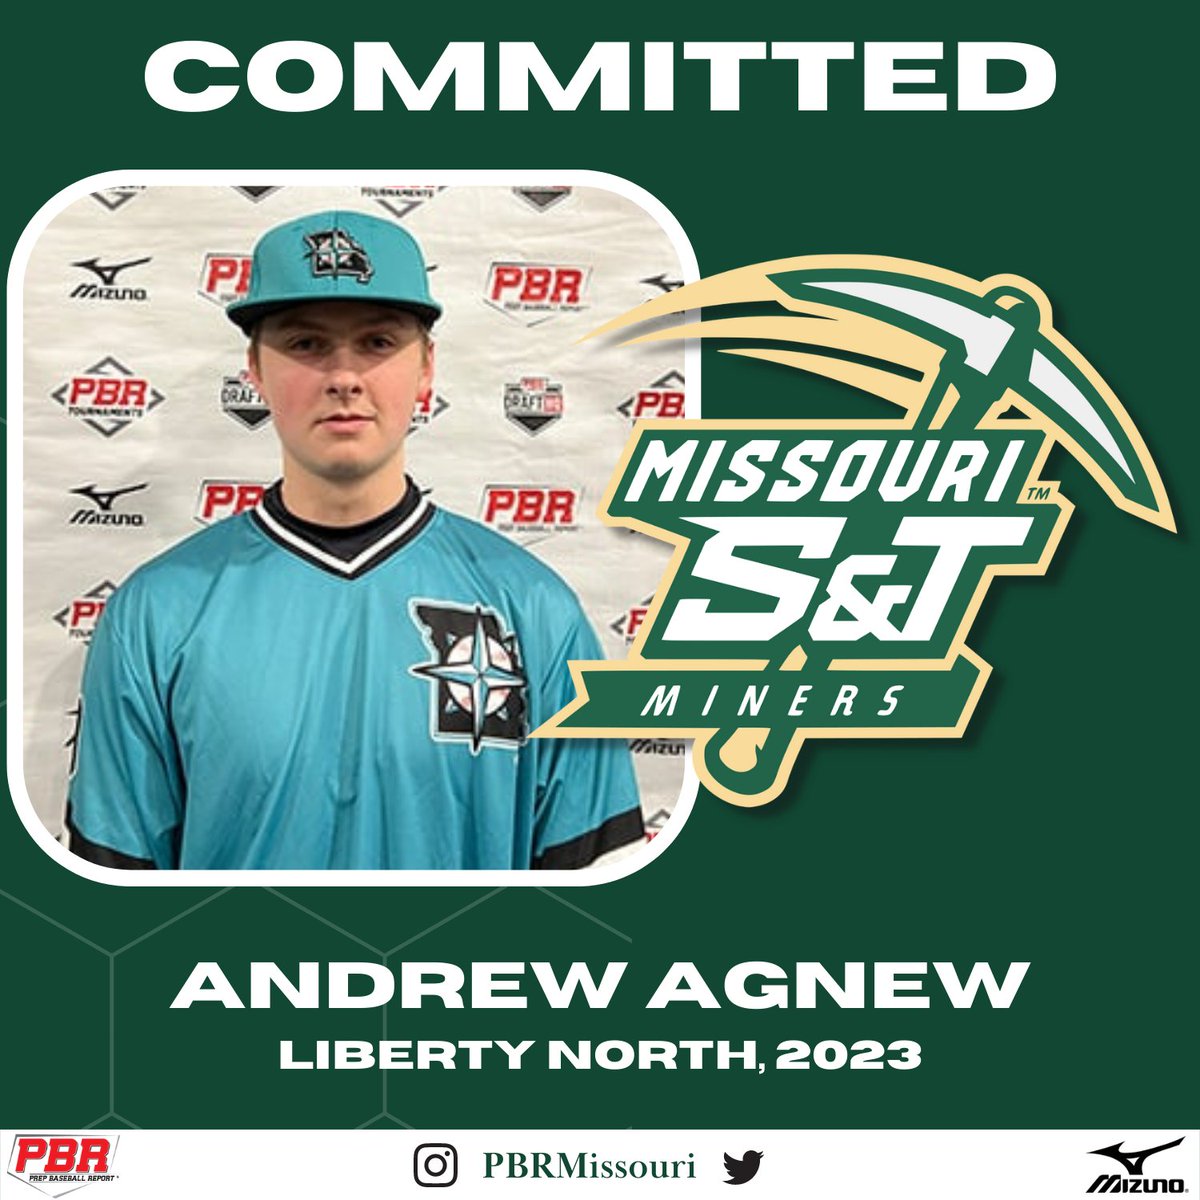 LHP Andrew Agnew (Liberty North, 2023) commits to Missouri S&T. Agnew is ranked No. 230 overall in Missouri's senior class. 👤: bit.ly/3BPa4VX